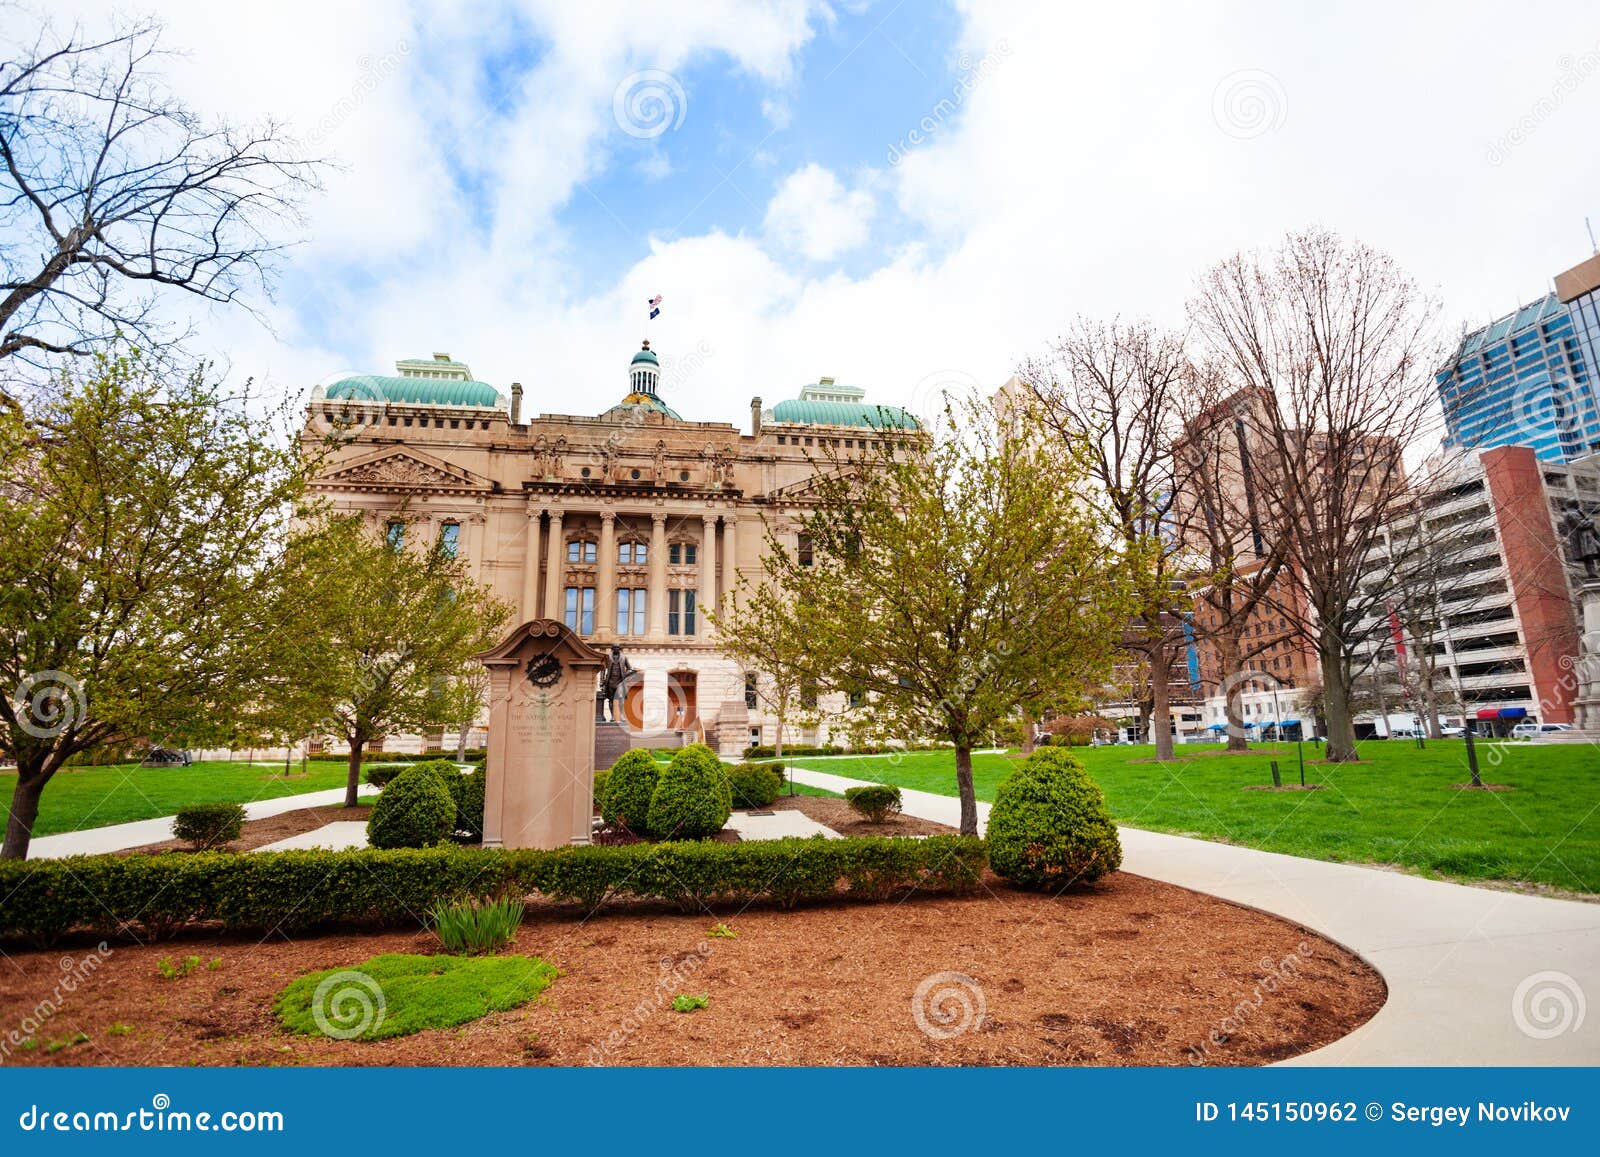 indiana statehouse building in indianapolis, usa